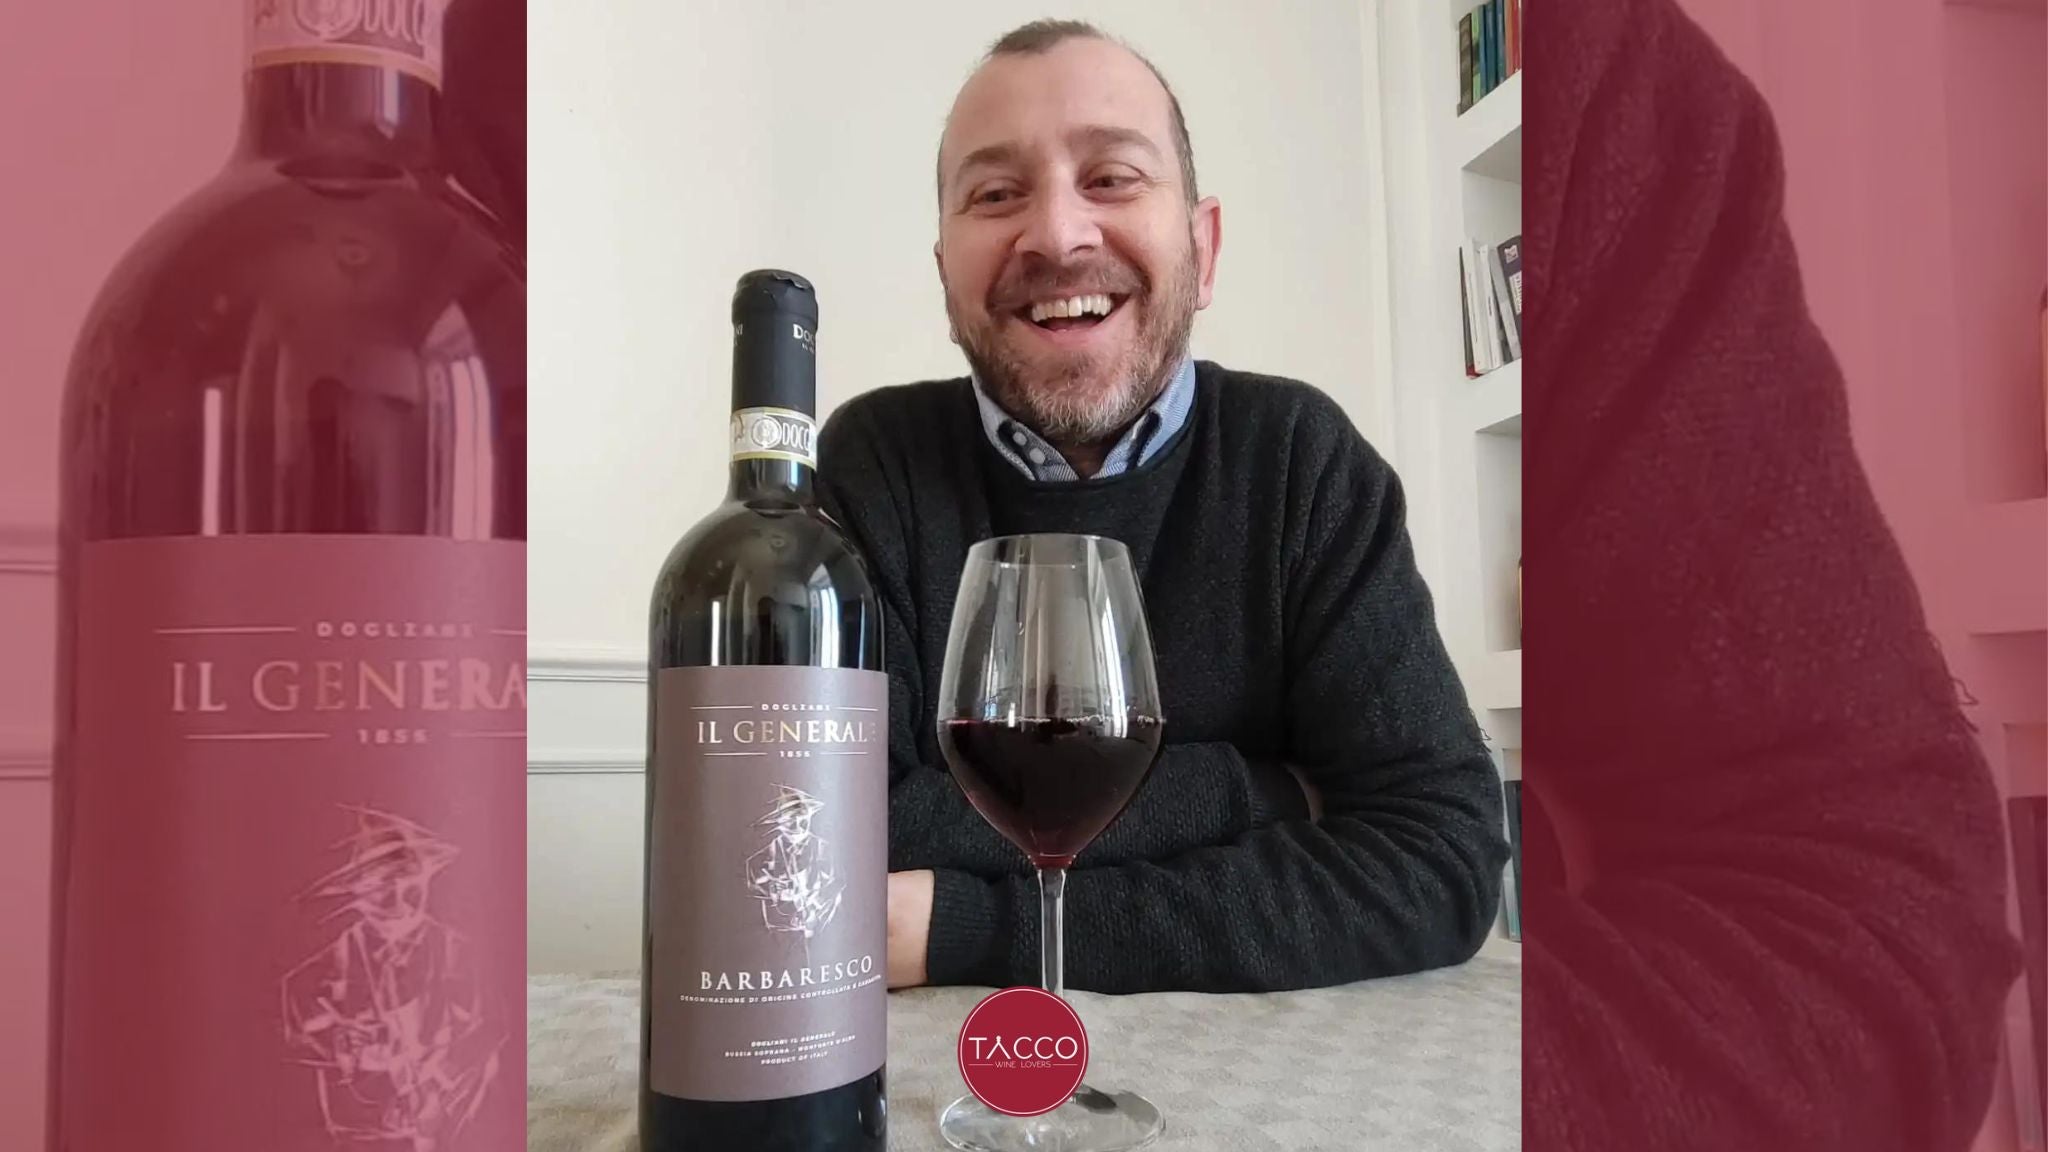 Tasted (and drank it) for you! Barbaresco Docg 2017